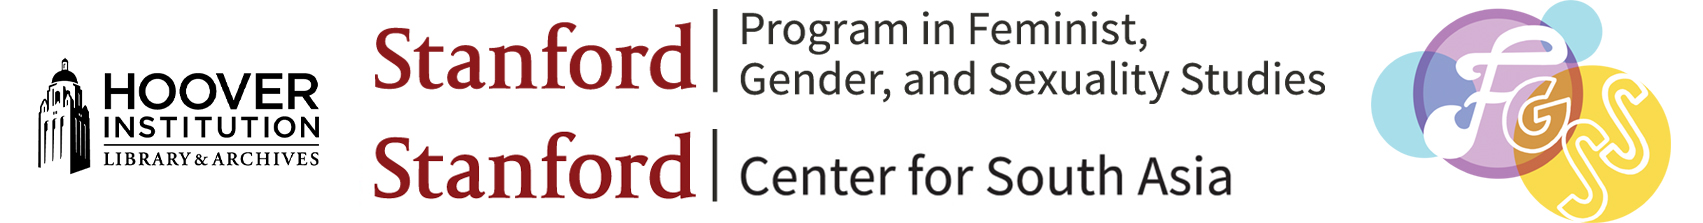 HILA logo combined with Stanford's Program in Program in Feminist, Gender, and Sexuality Studies